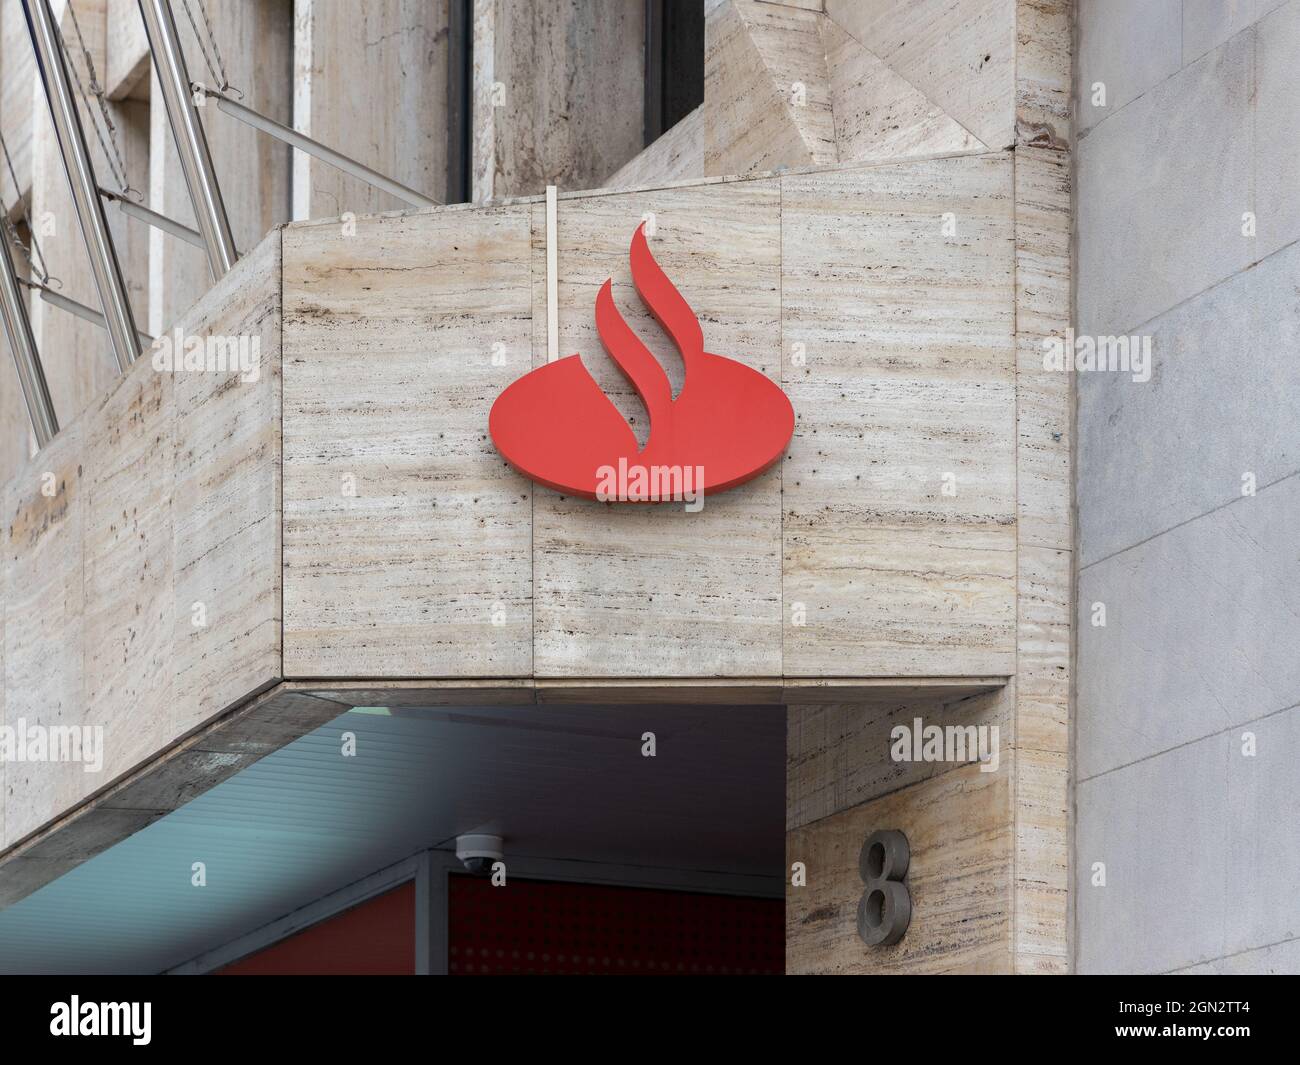 VALENCIA, SPAIN - SEPTEMBER 13, 2021: Banco Santander is a Spanish bank based in Santander. It is one of the most important financial institutions in Stock Photo